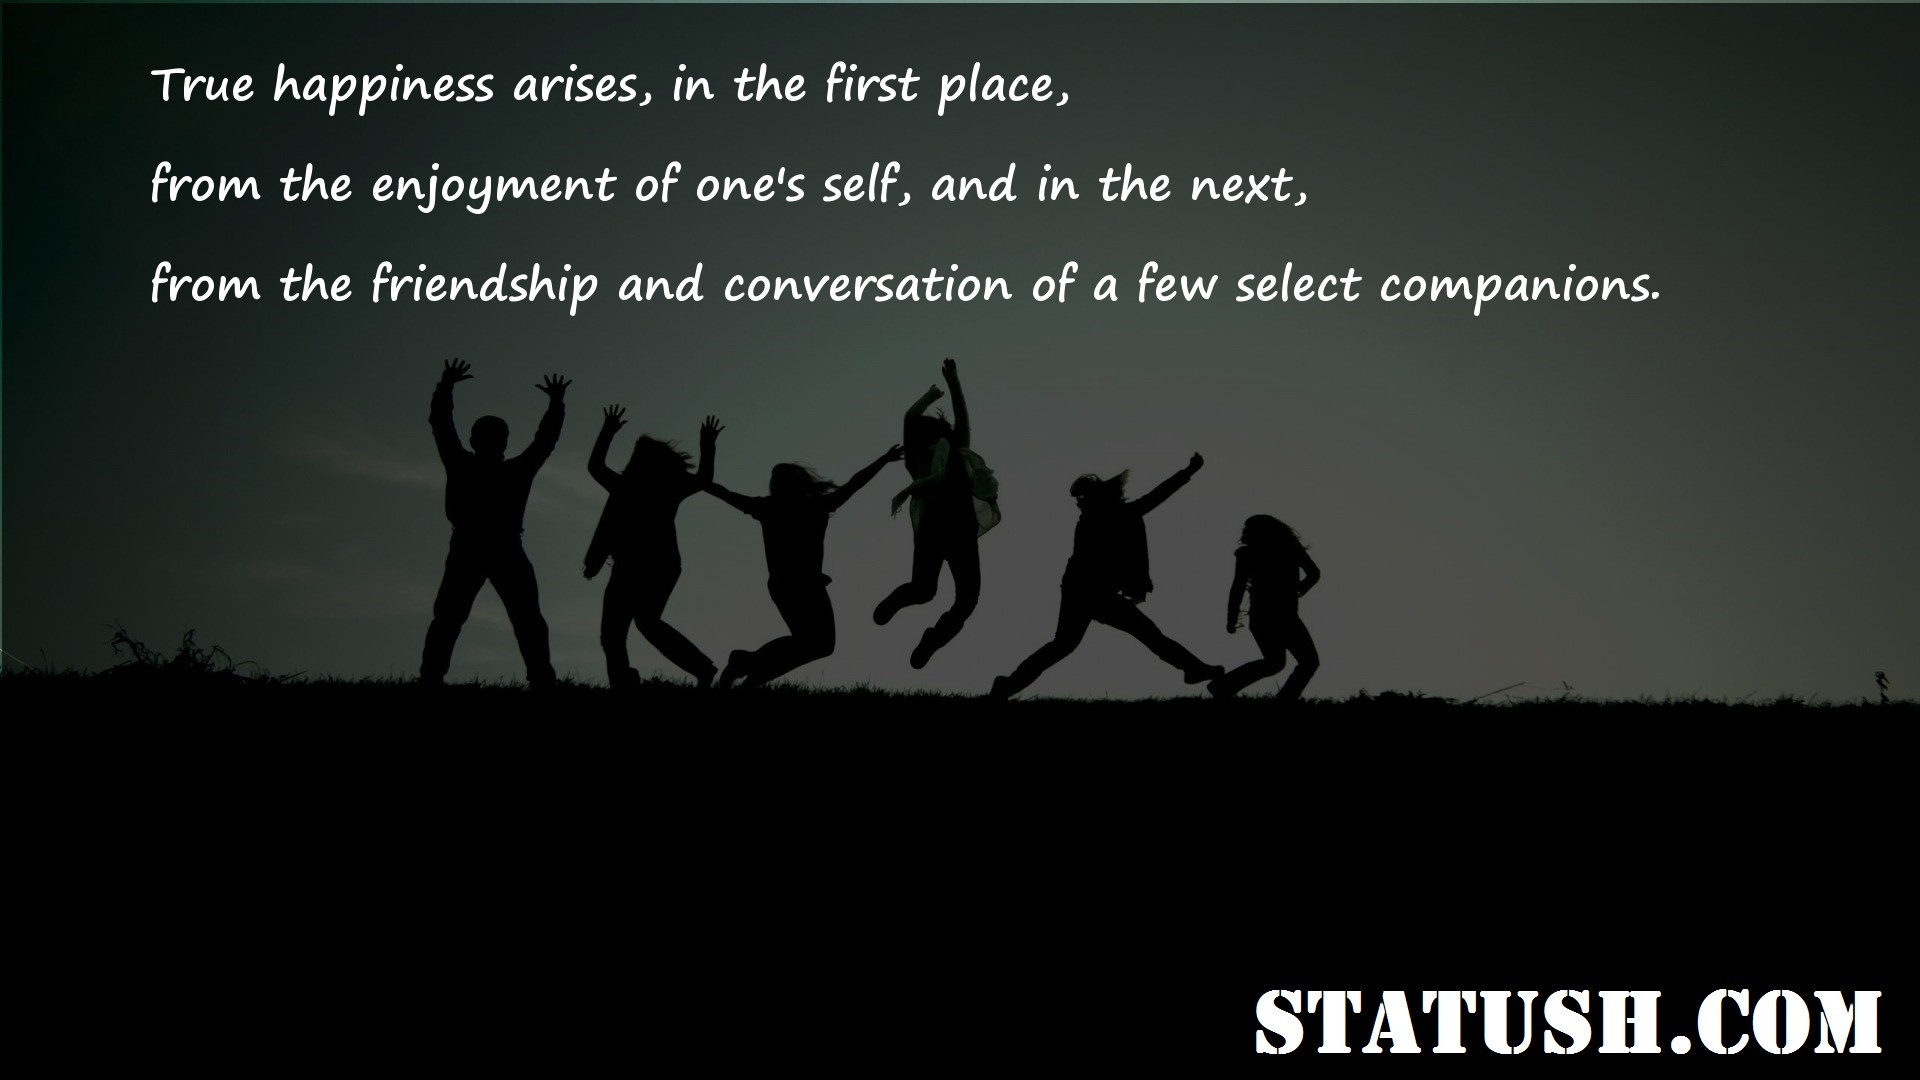 True happiness arises in the first place - Friendship Quotes at statush.com